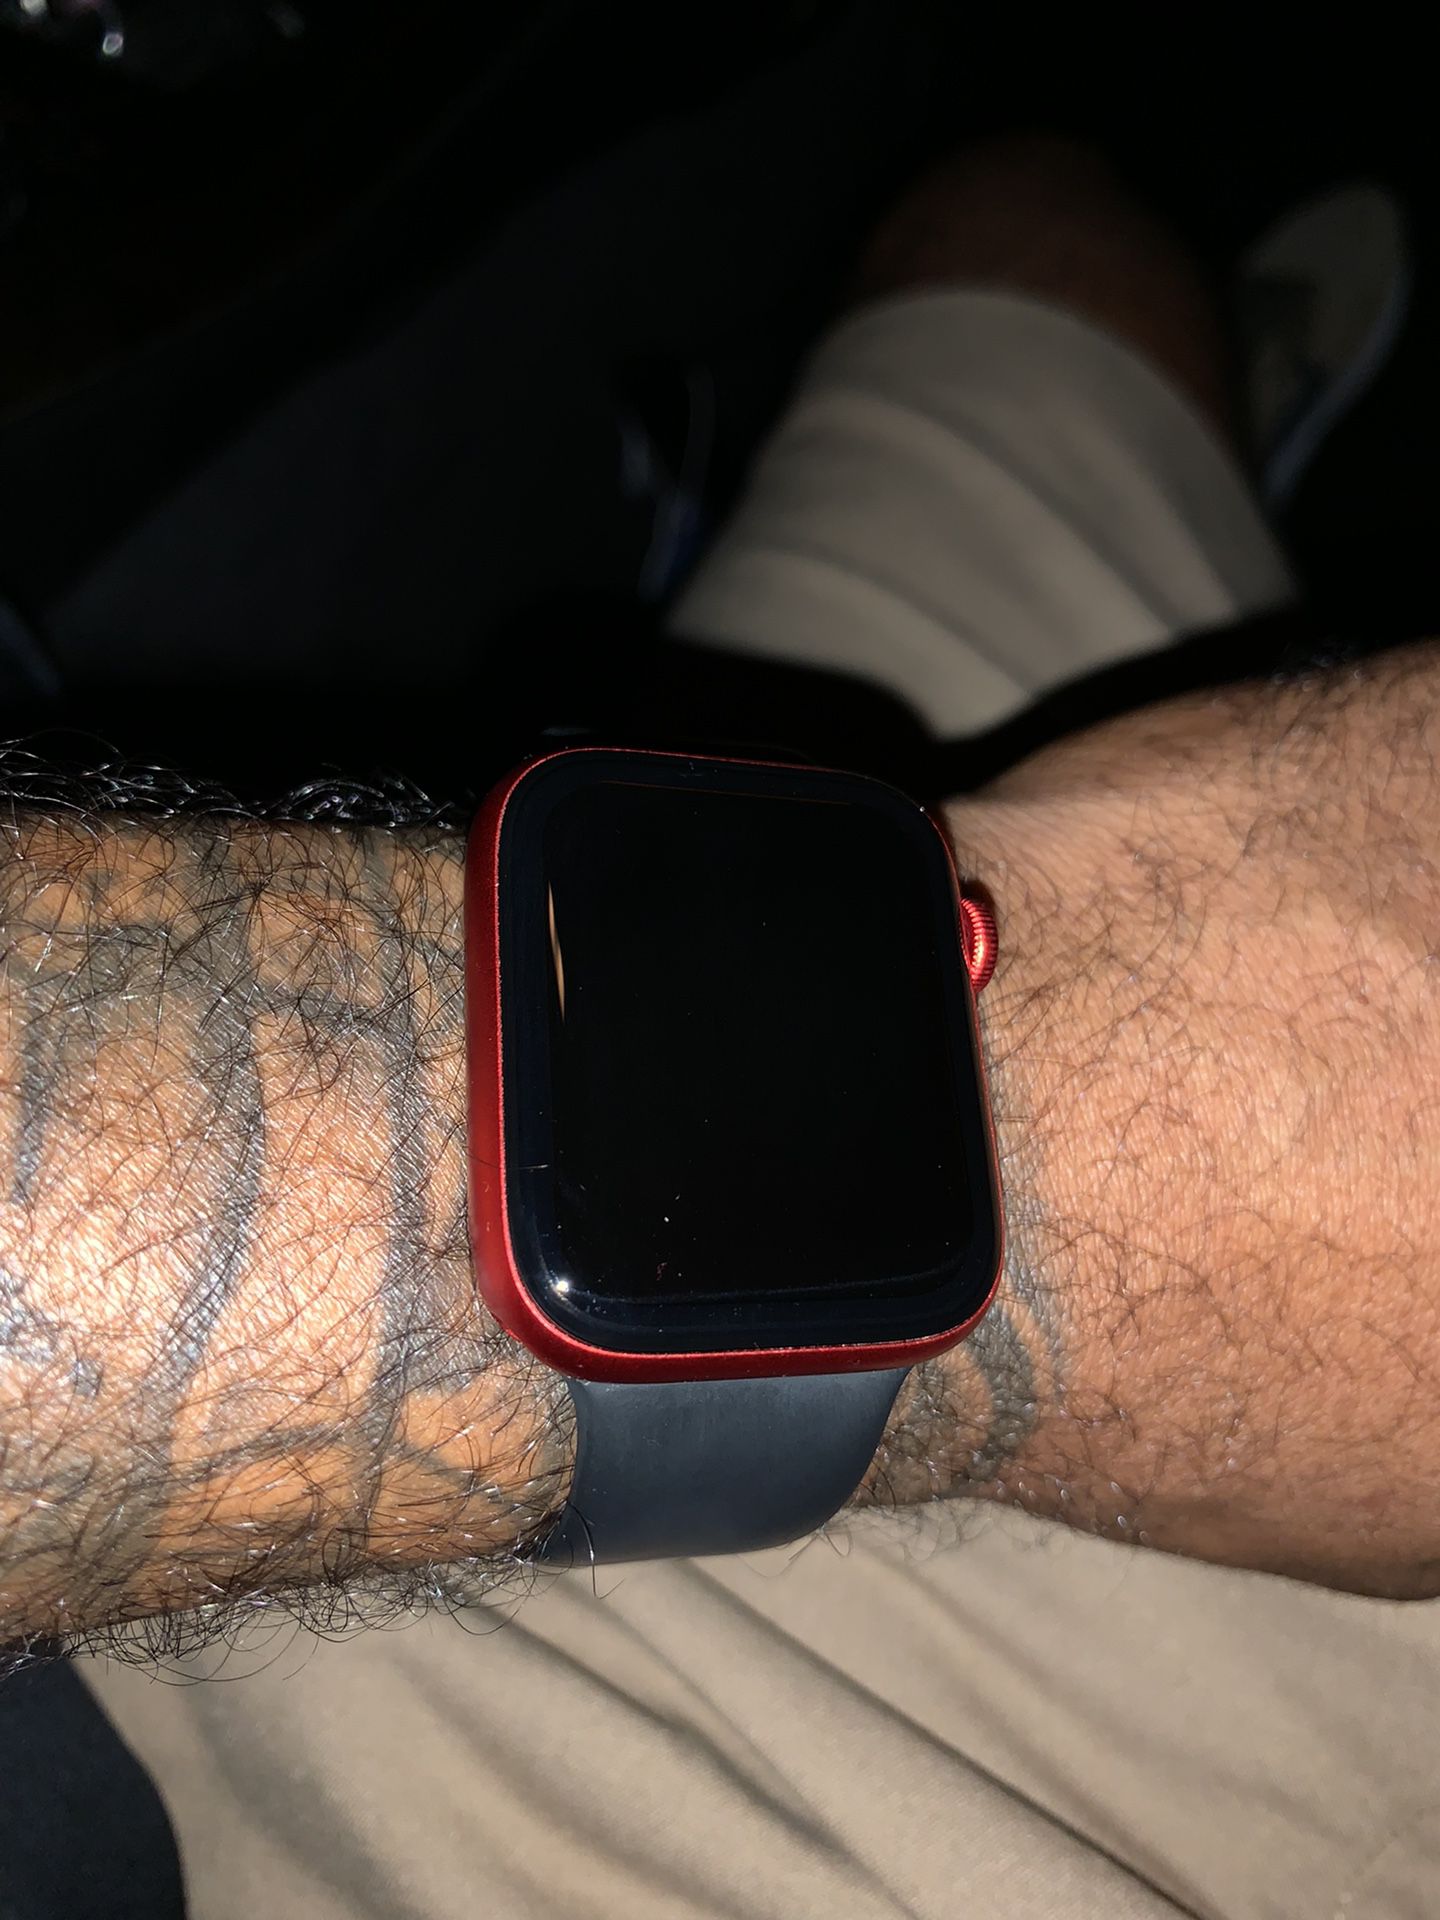 44”  Apple Watch Series 6  GPS  Satellite  Unlockedor Any Career  And I’ll Throw In A Screen Protector And Stand